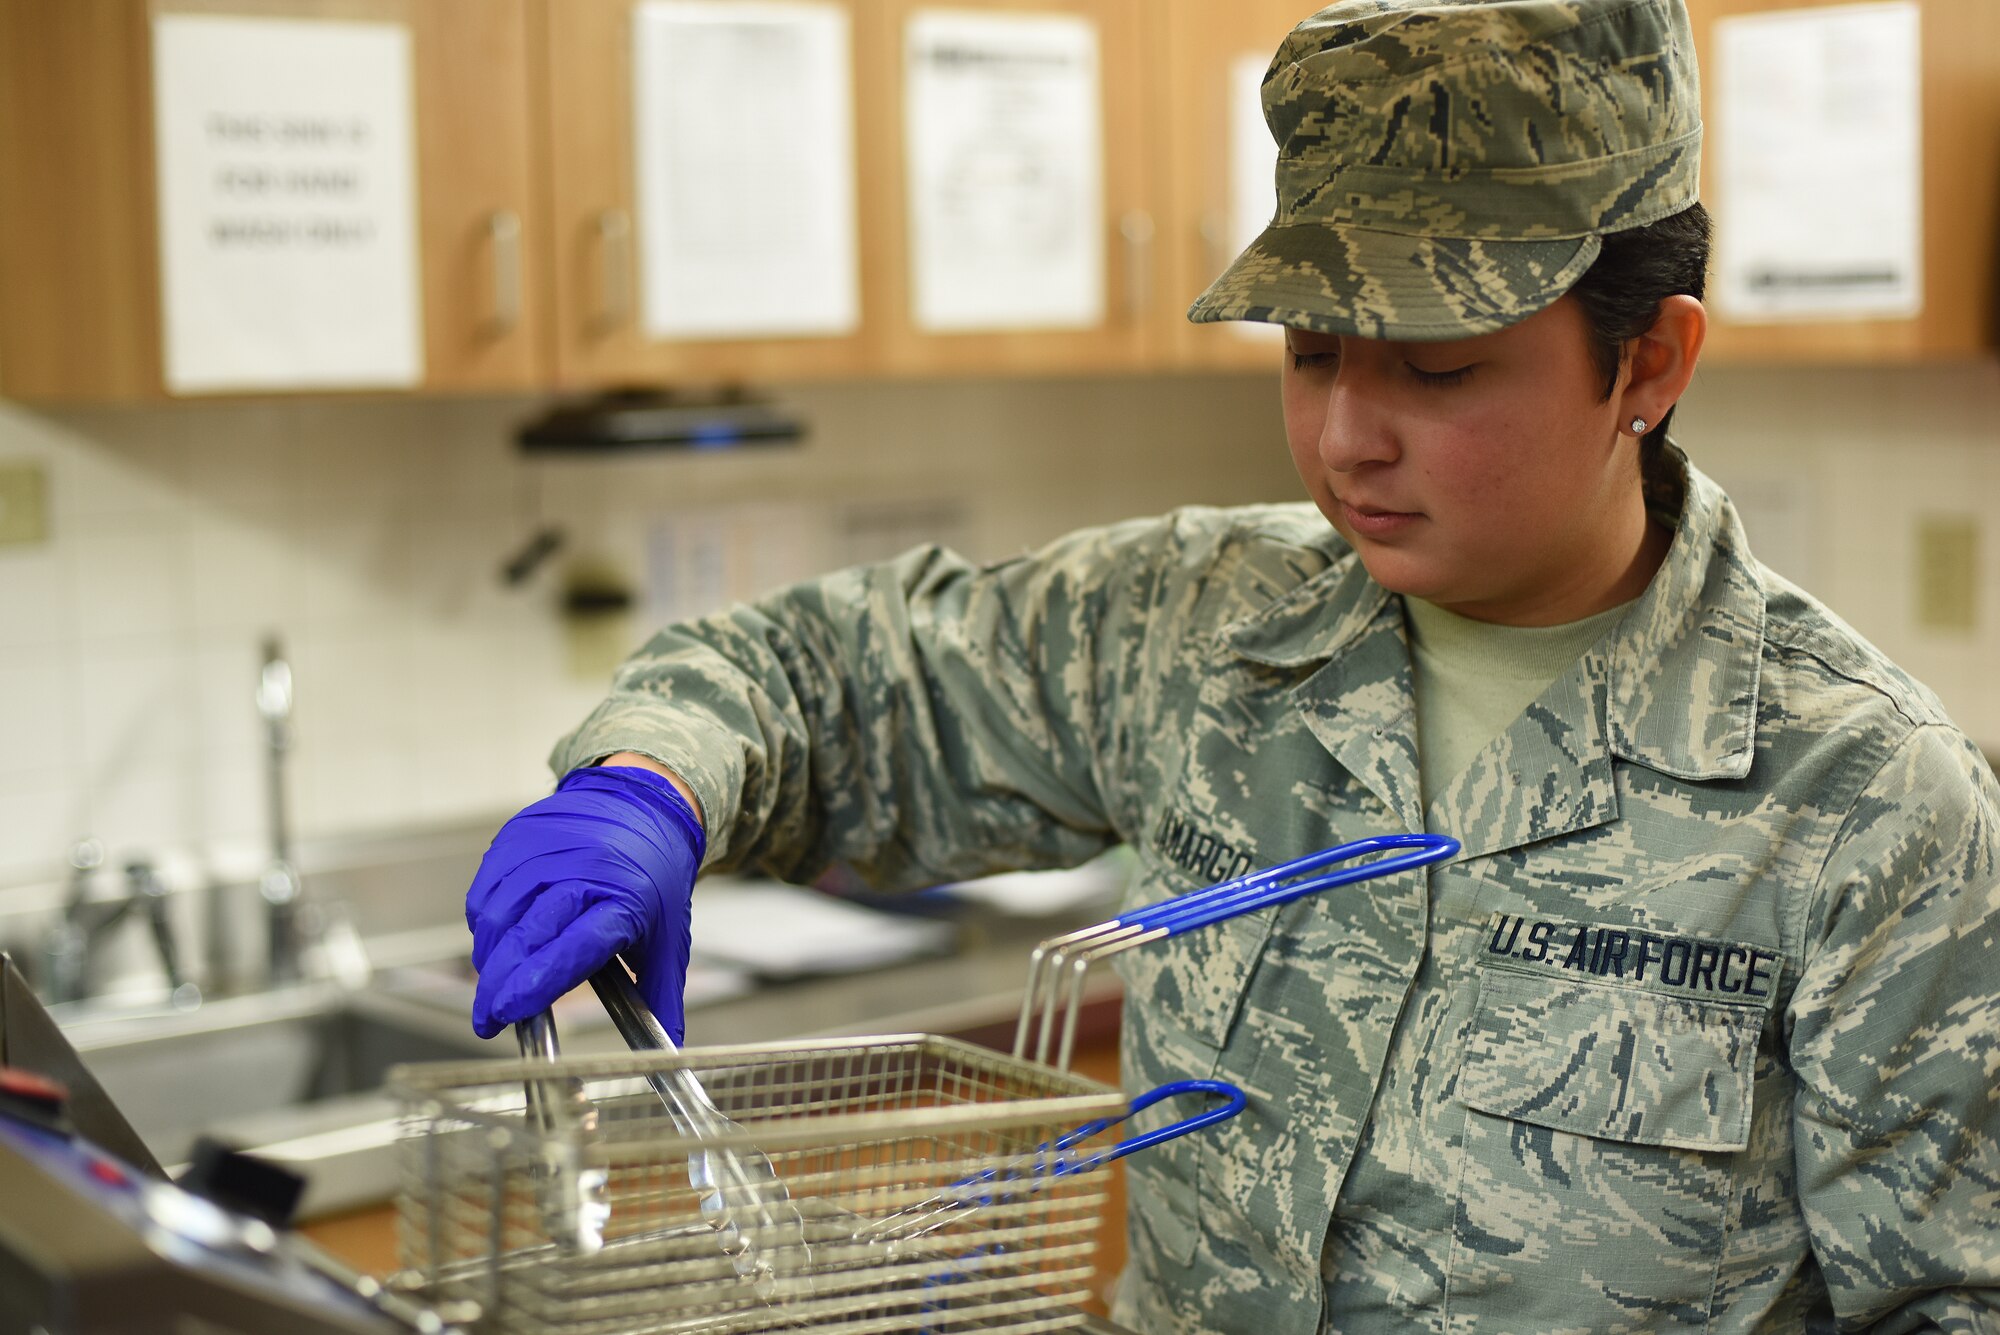 Airman 1st Class Victoria Camargo, 341st Force Support Squadron missile chef, prepares food at a missile alert facility Oct. 18, 2019, near Malmstrom Air Force Base, Montana.